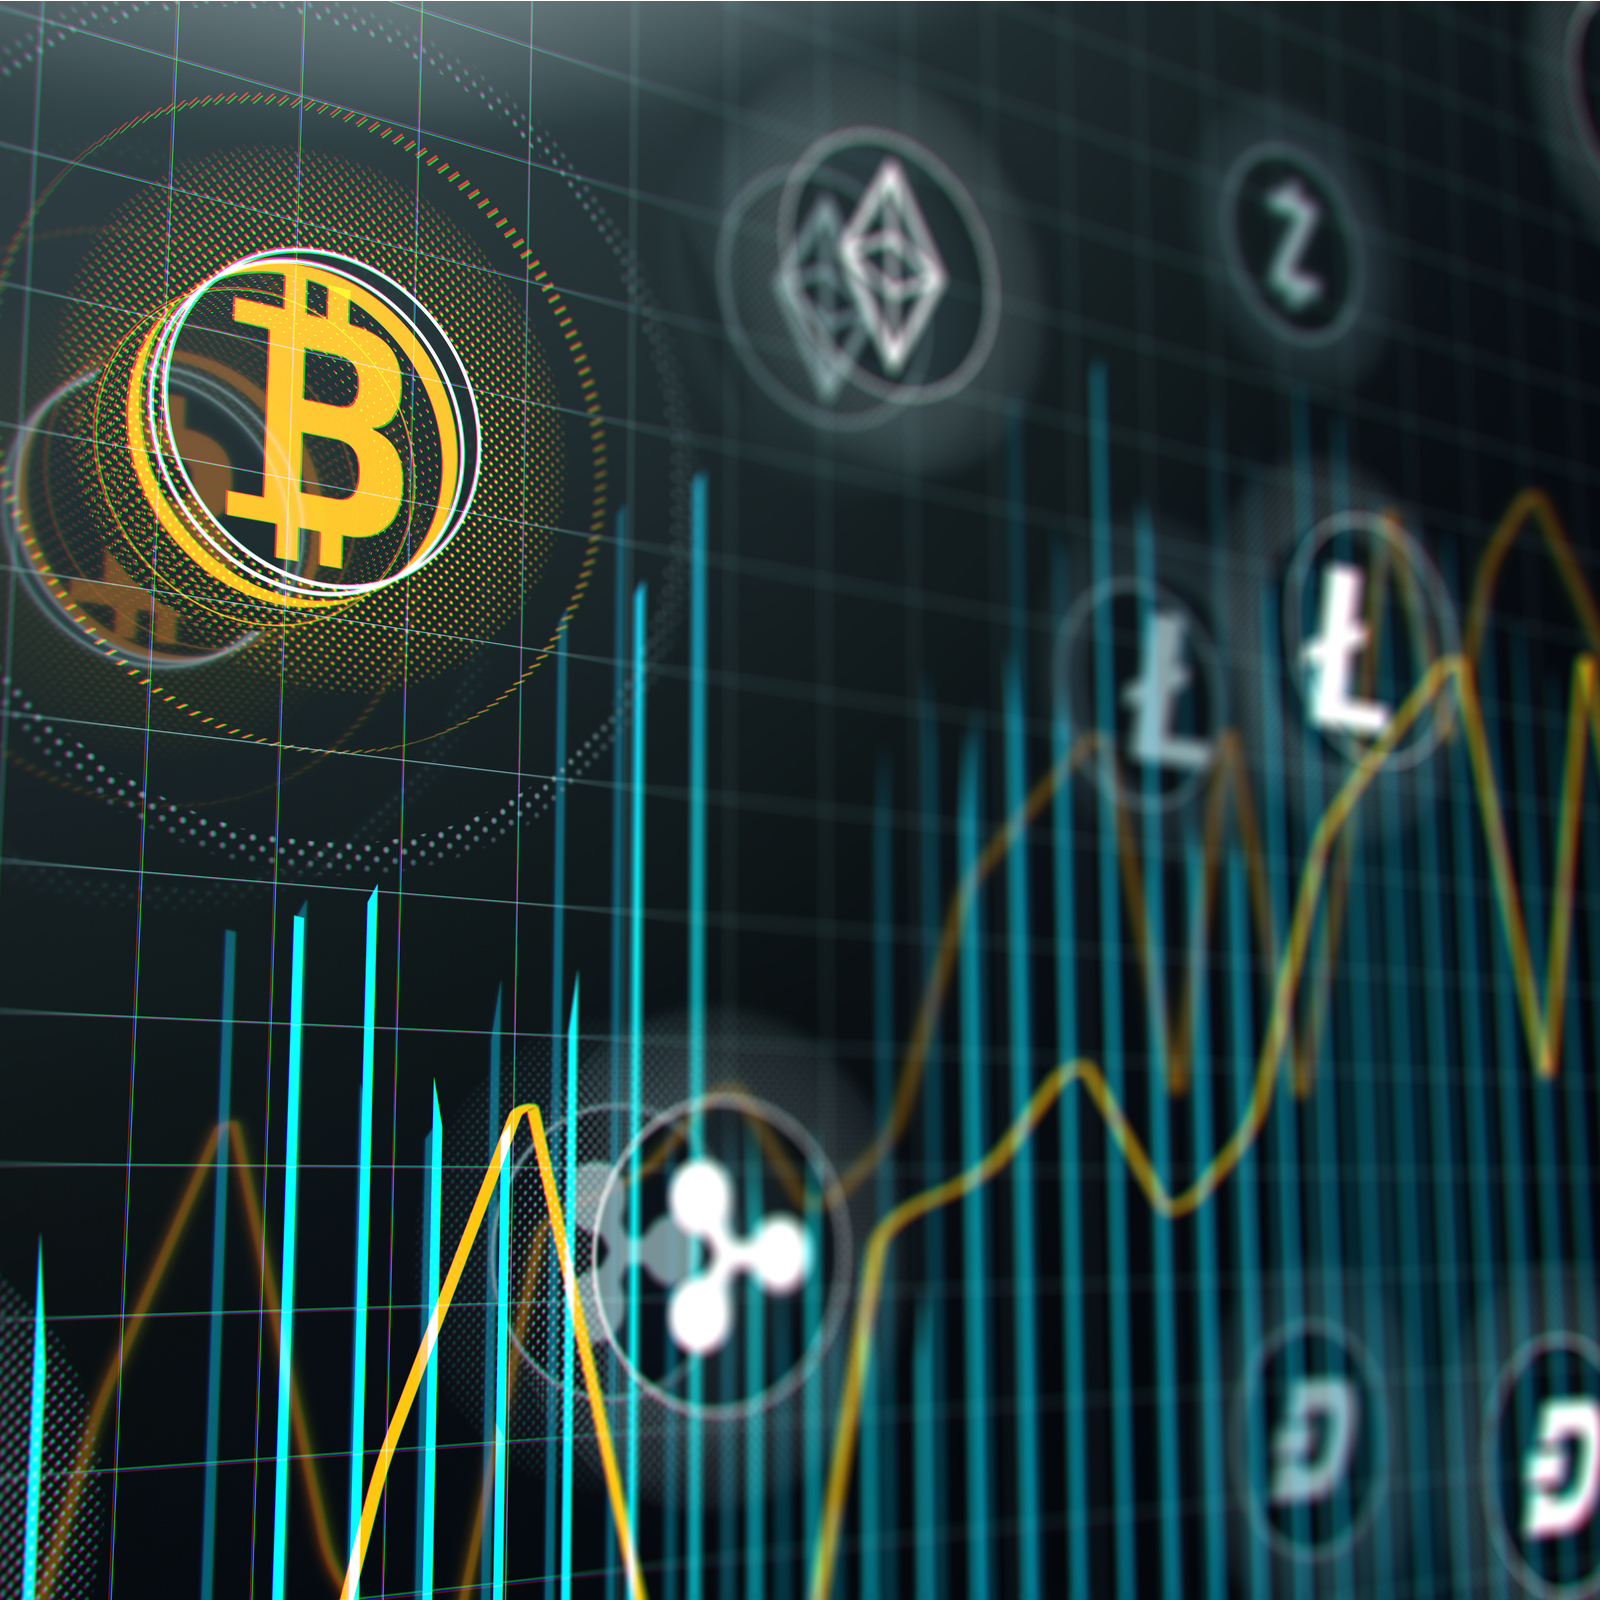 The Top Ten Altcoin Markets of 2014 – How Are They Faring Now?